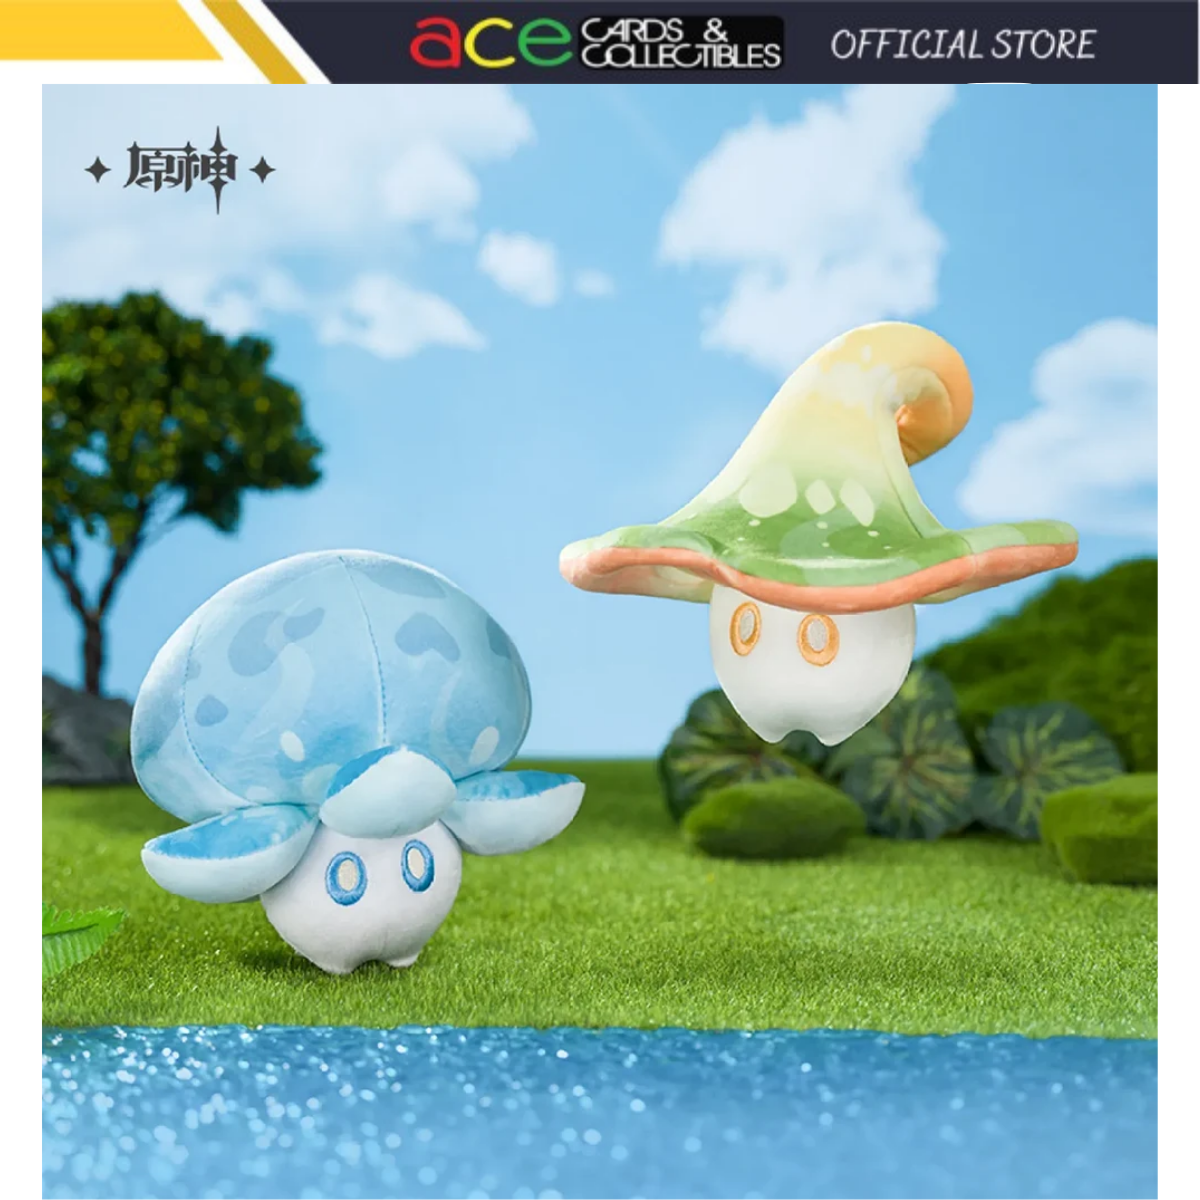 miHoYo Genshin Impact Floating Hydro / Dendro Fungus Plushie-Hydro Fungus-miHoYo-Ace Cards &amp; Collectibles